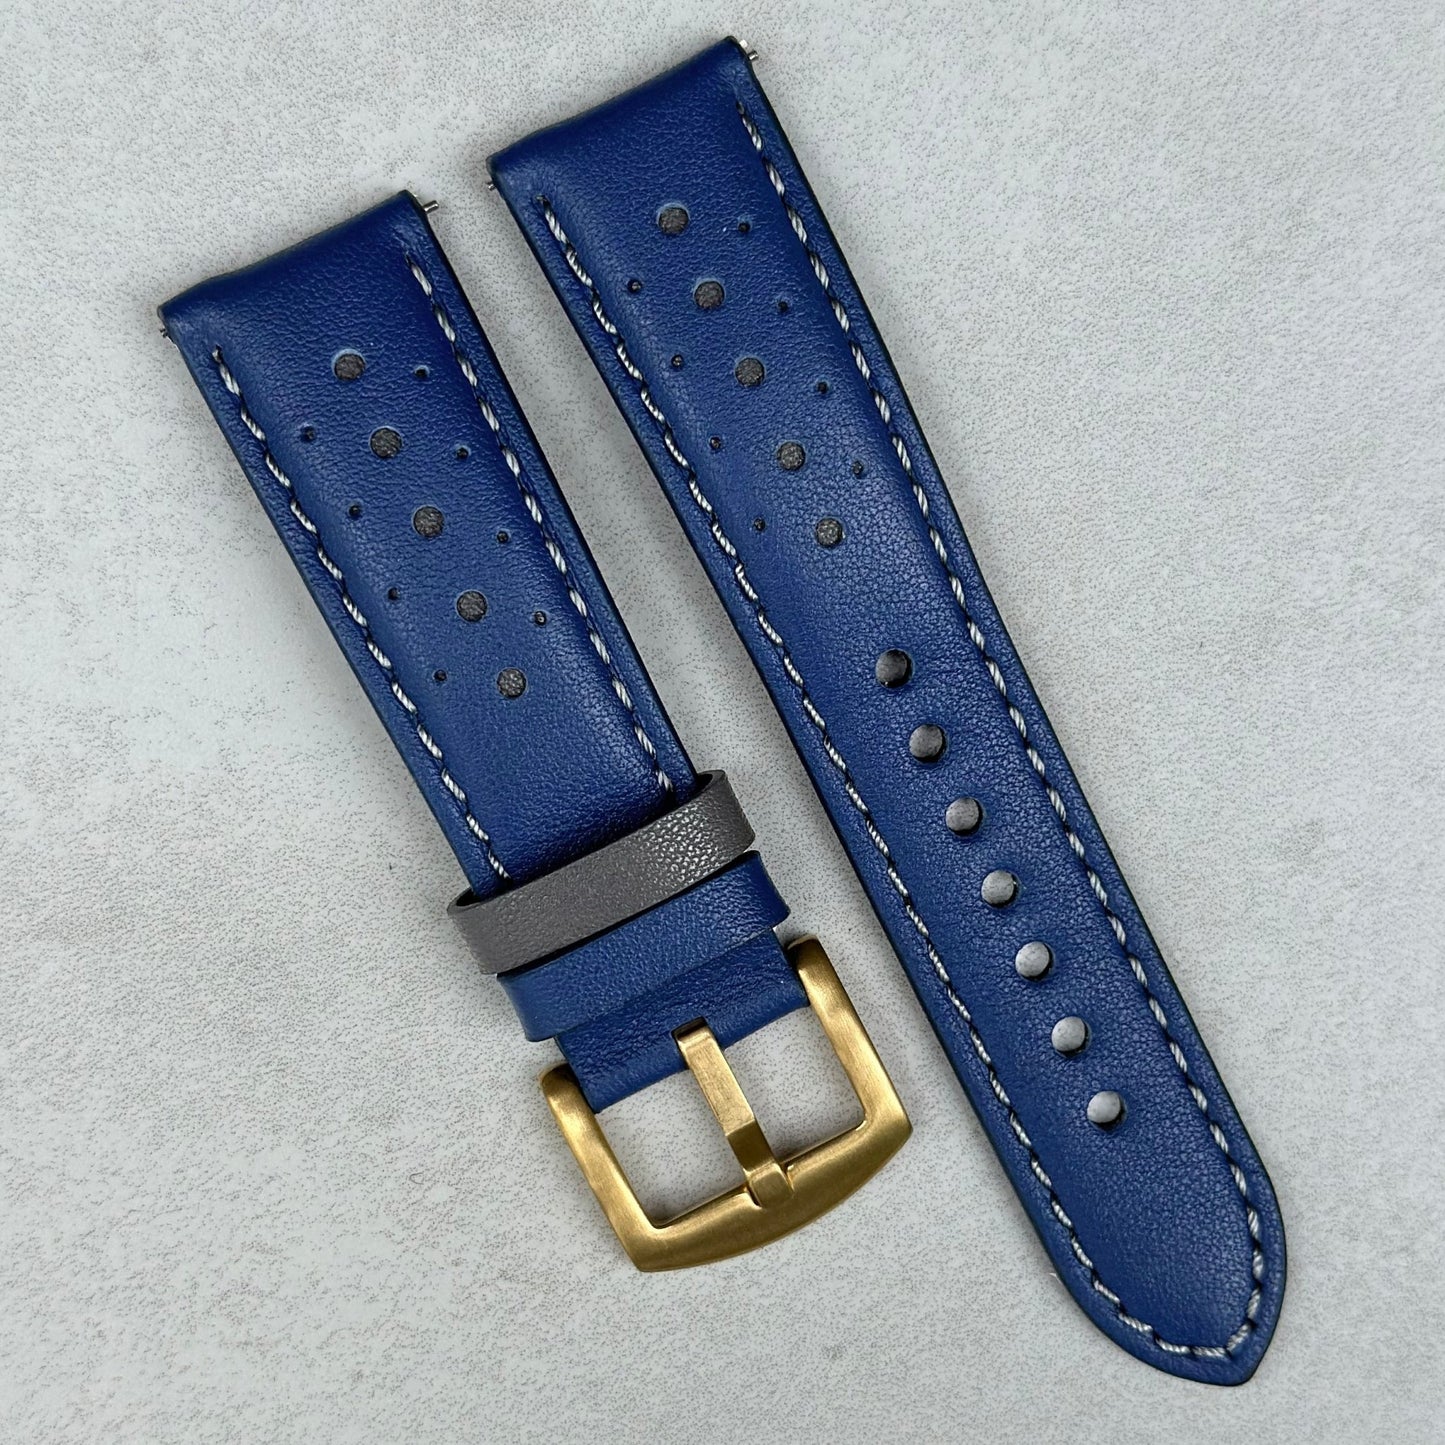 Le Mans blue and grey full grain leather racing watch strap. Brushed gold buckle.